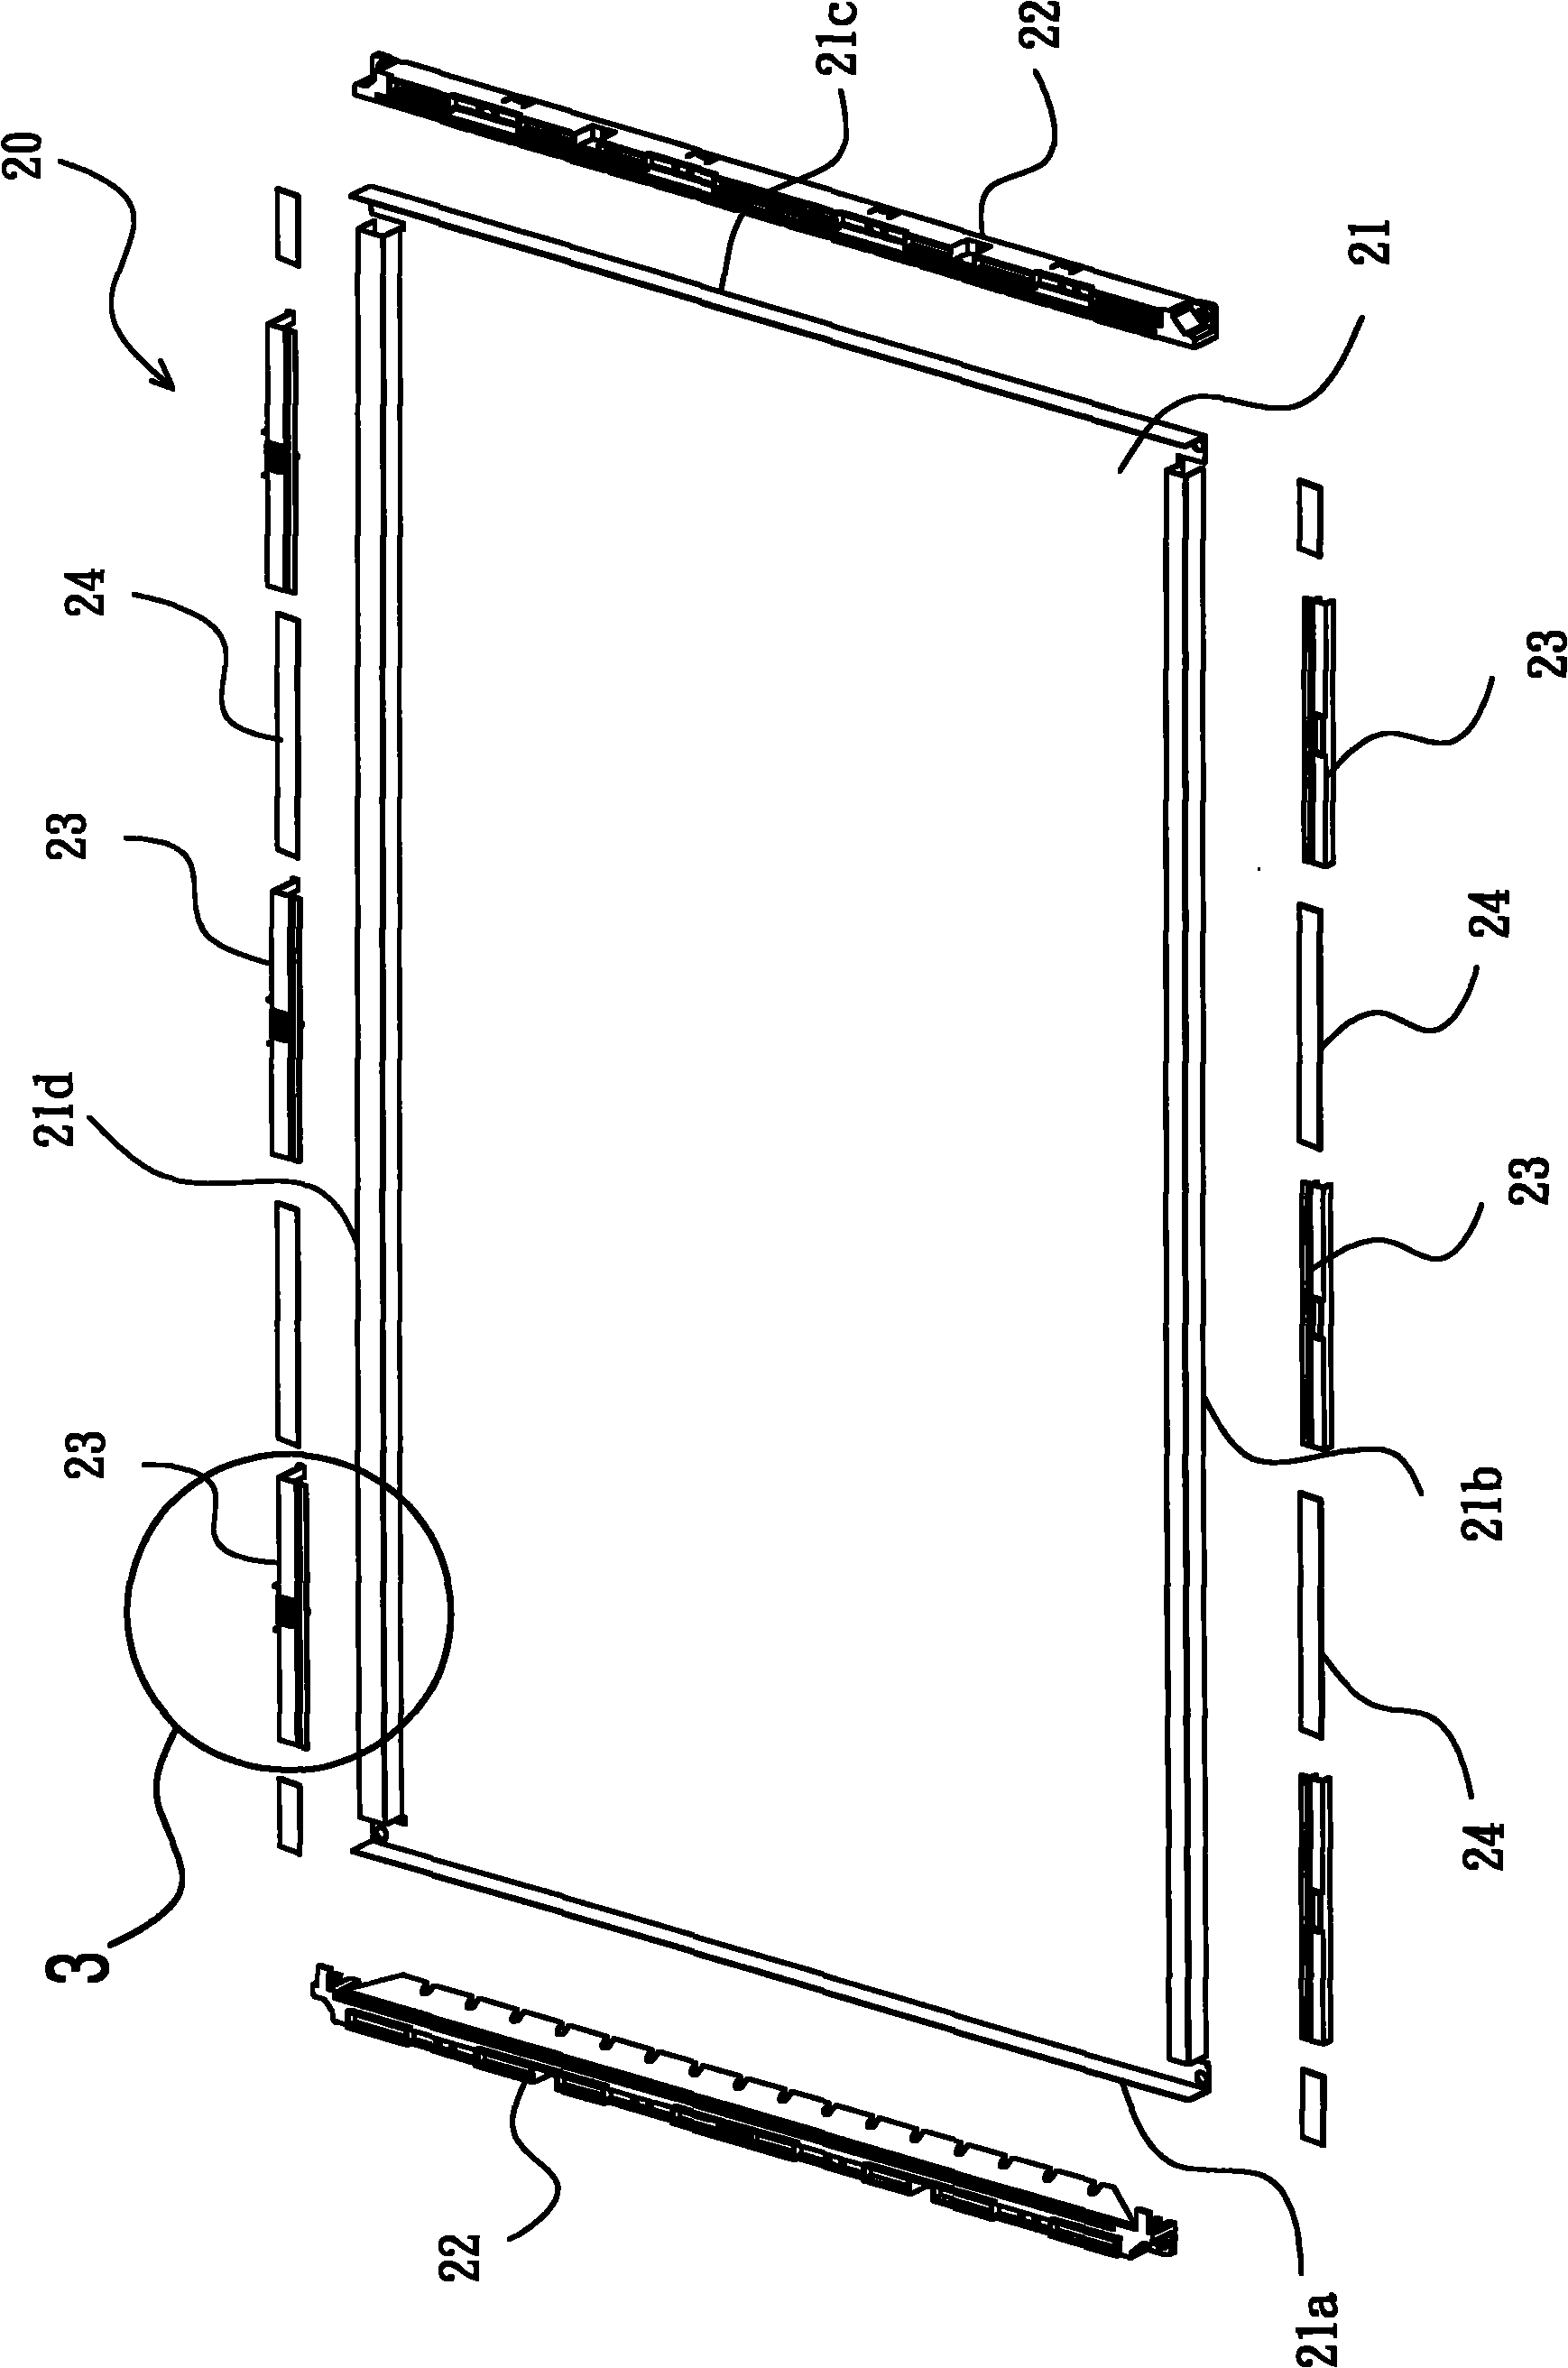 Backlight module and rubber frame unit structure thereof